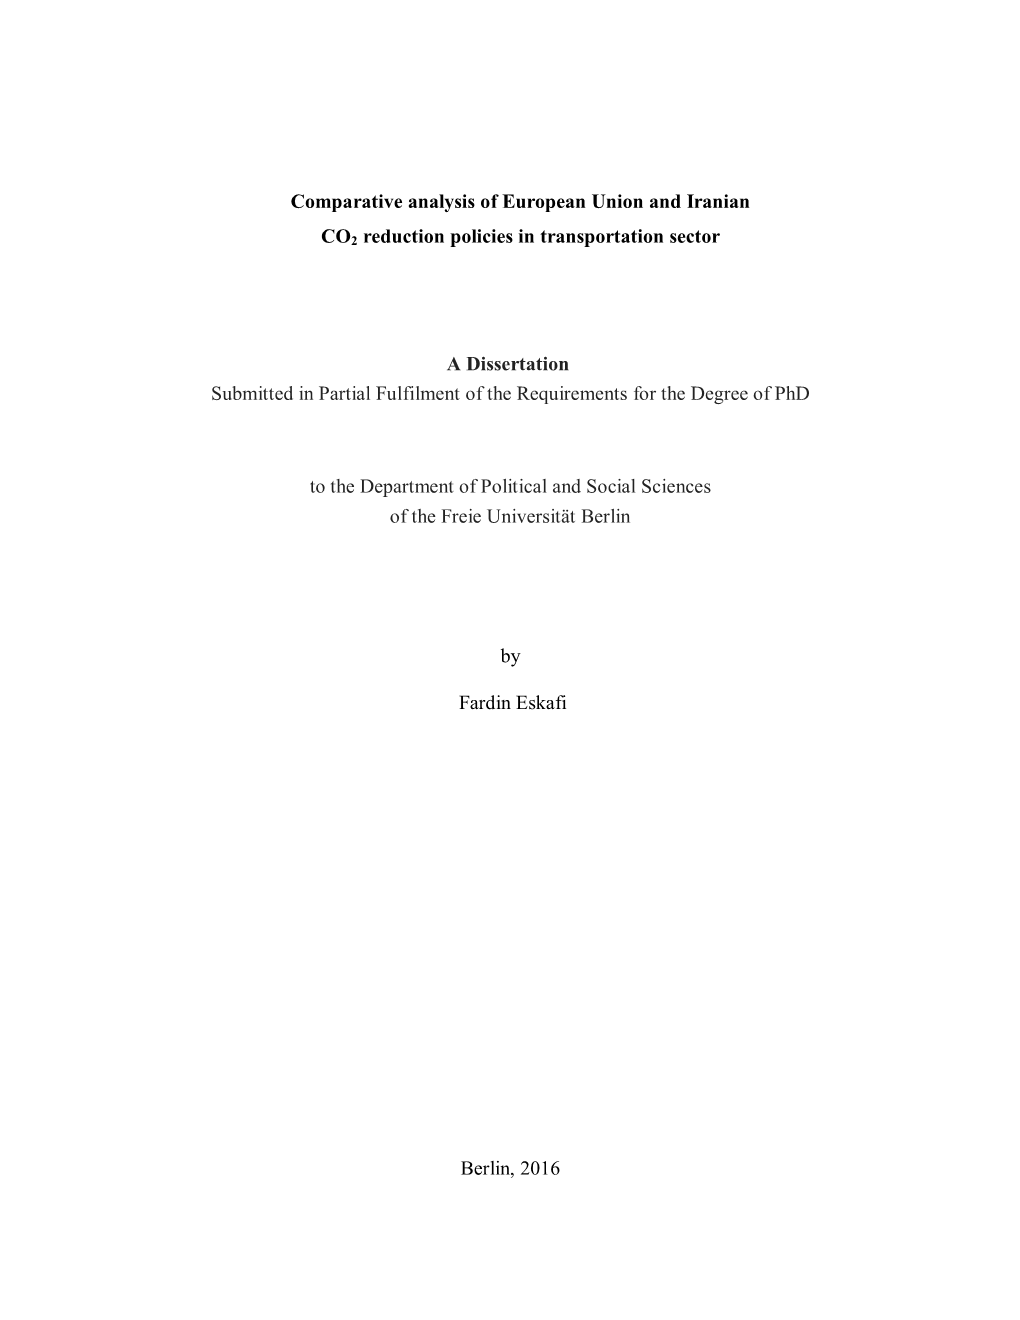 Comparative Analysis of European Union and Iranian CO2 Reduction Policies in Transportation Sector a Dissertation Submitted In